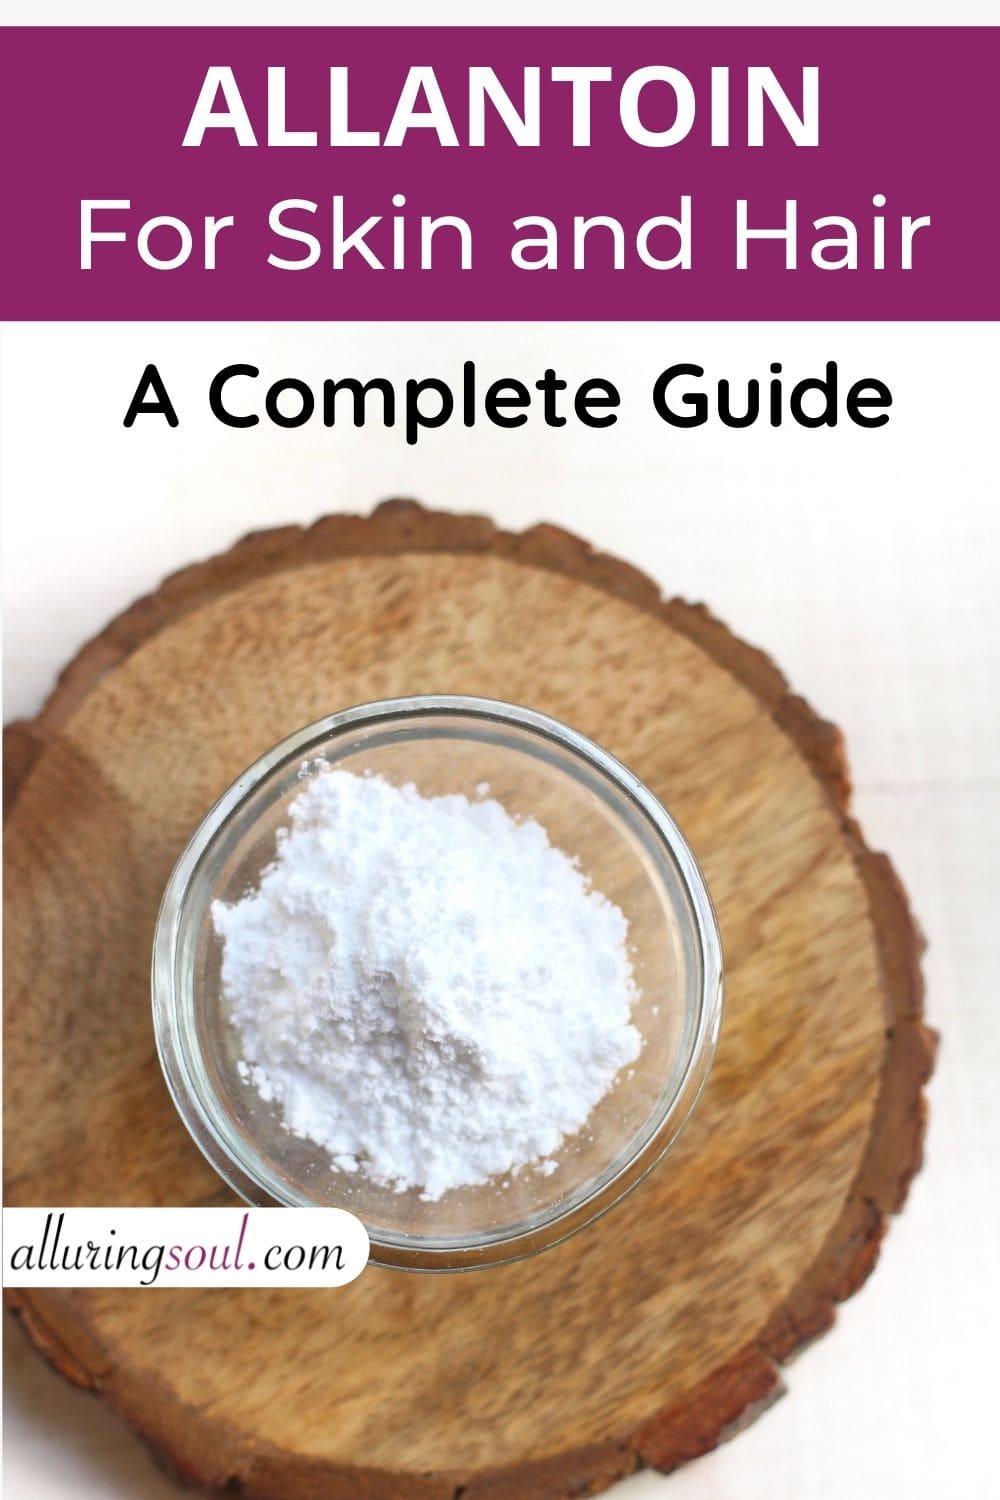 Allantoin For Skin And Hair - A Complete Guide